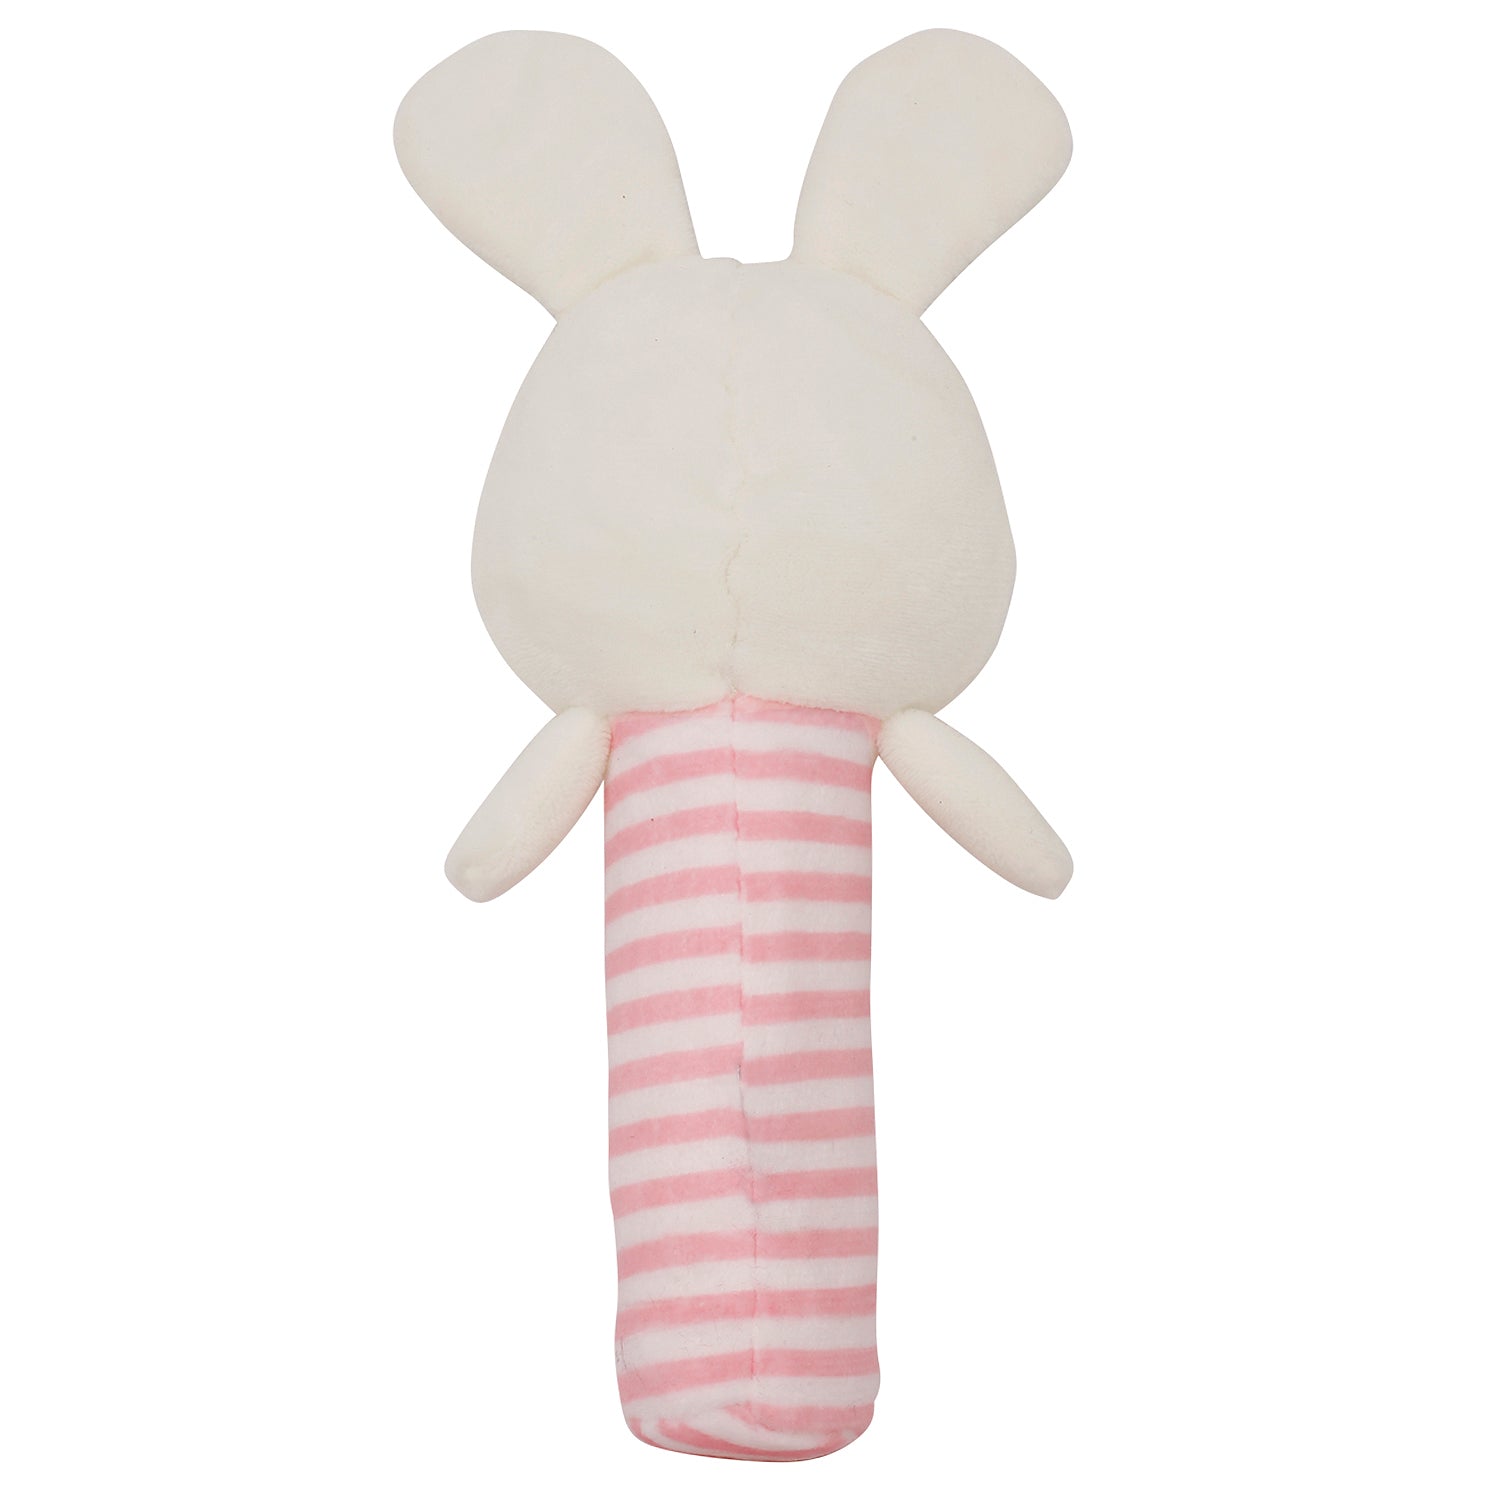 Blushing Bunny White And Pink Handheld Rattle Toy - Baby Moo